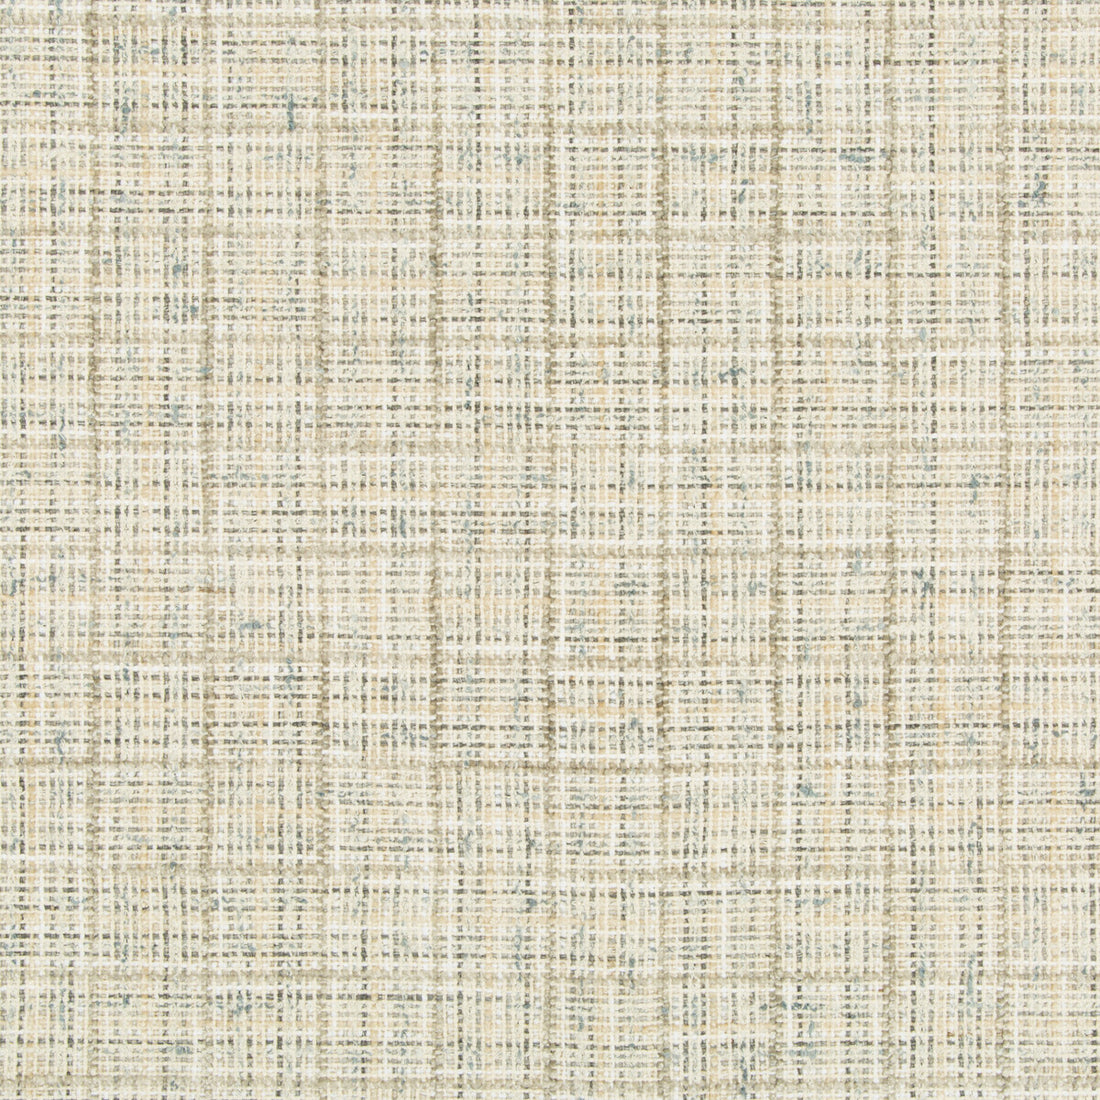 Wenthworth Check fabric in alabaster color - pattern 35188.1611.0 - by Kravet Couture in the David Phoenix Well-Suited collection